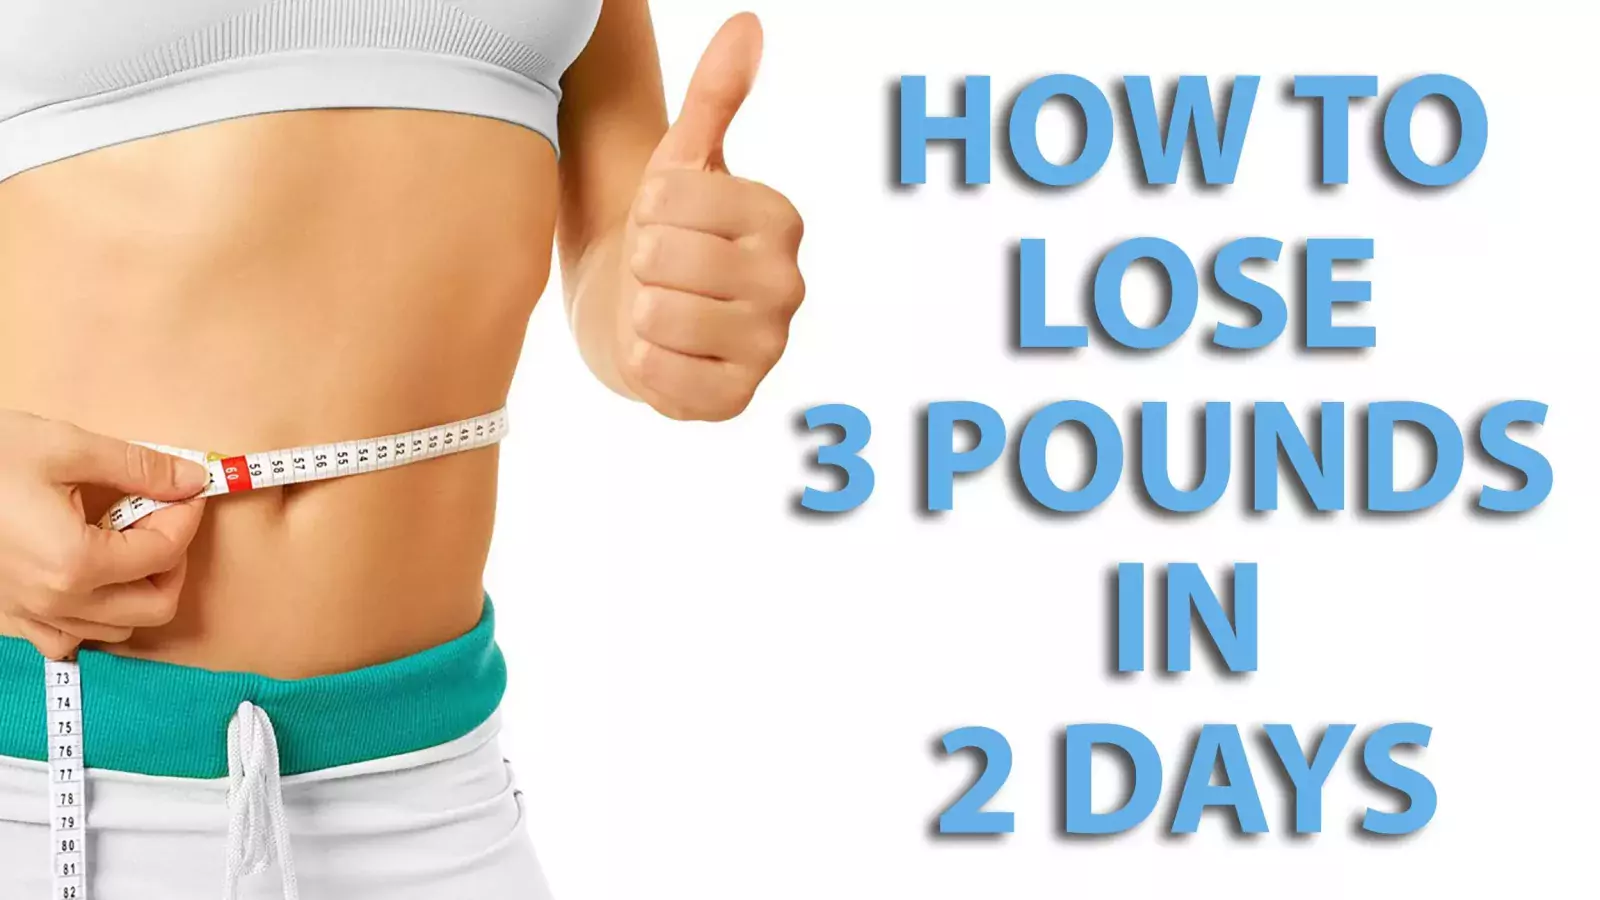 How to Lose 3 Pounds in 2 Days